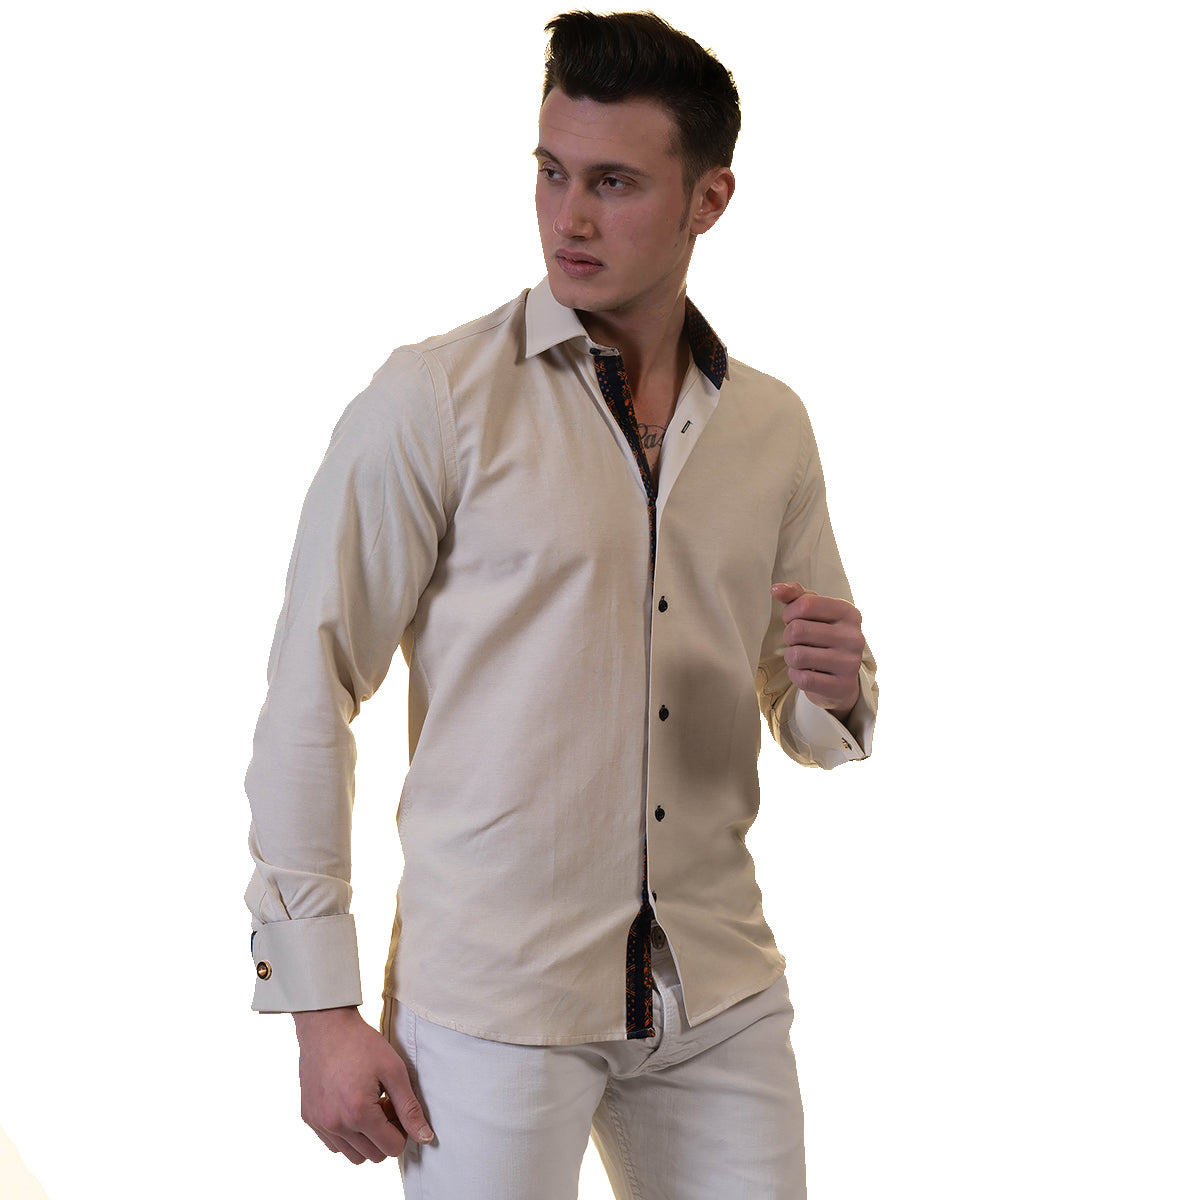 Off White Mens Slim Fit French Cuff Shirts with Cufflink Holes - Casual and Formal